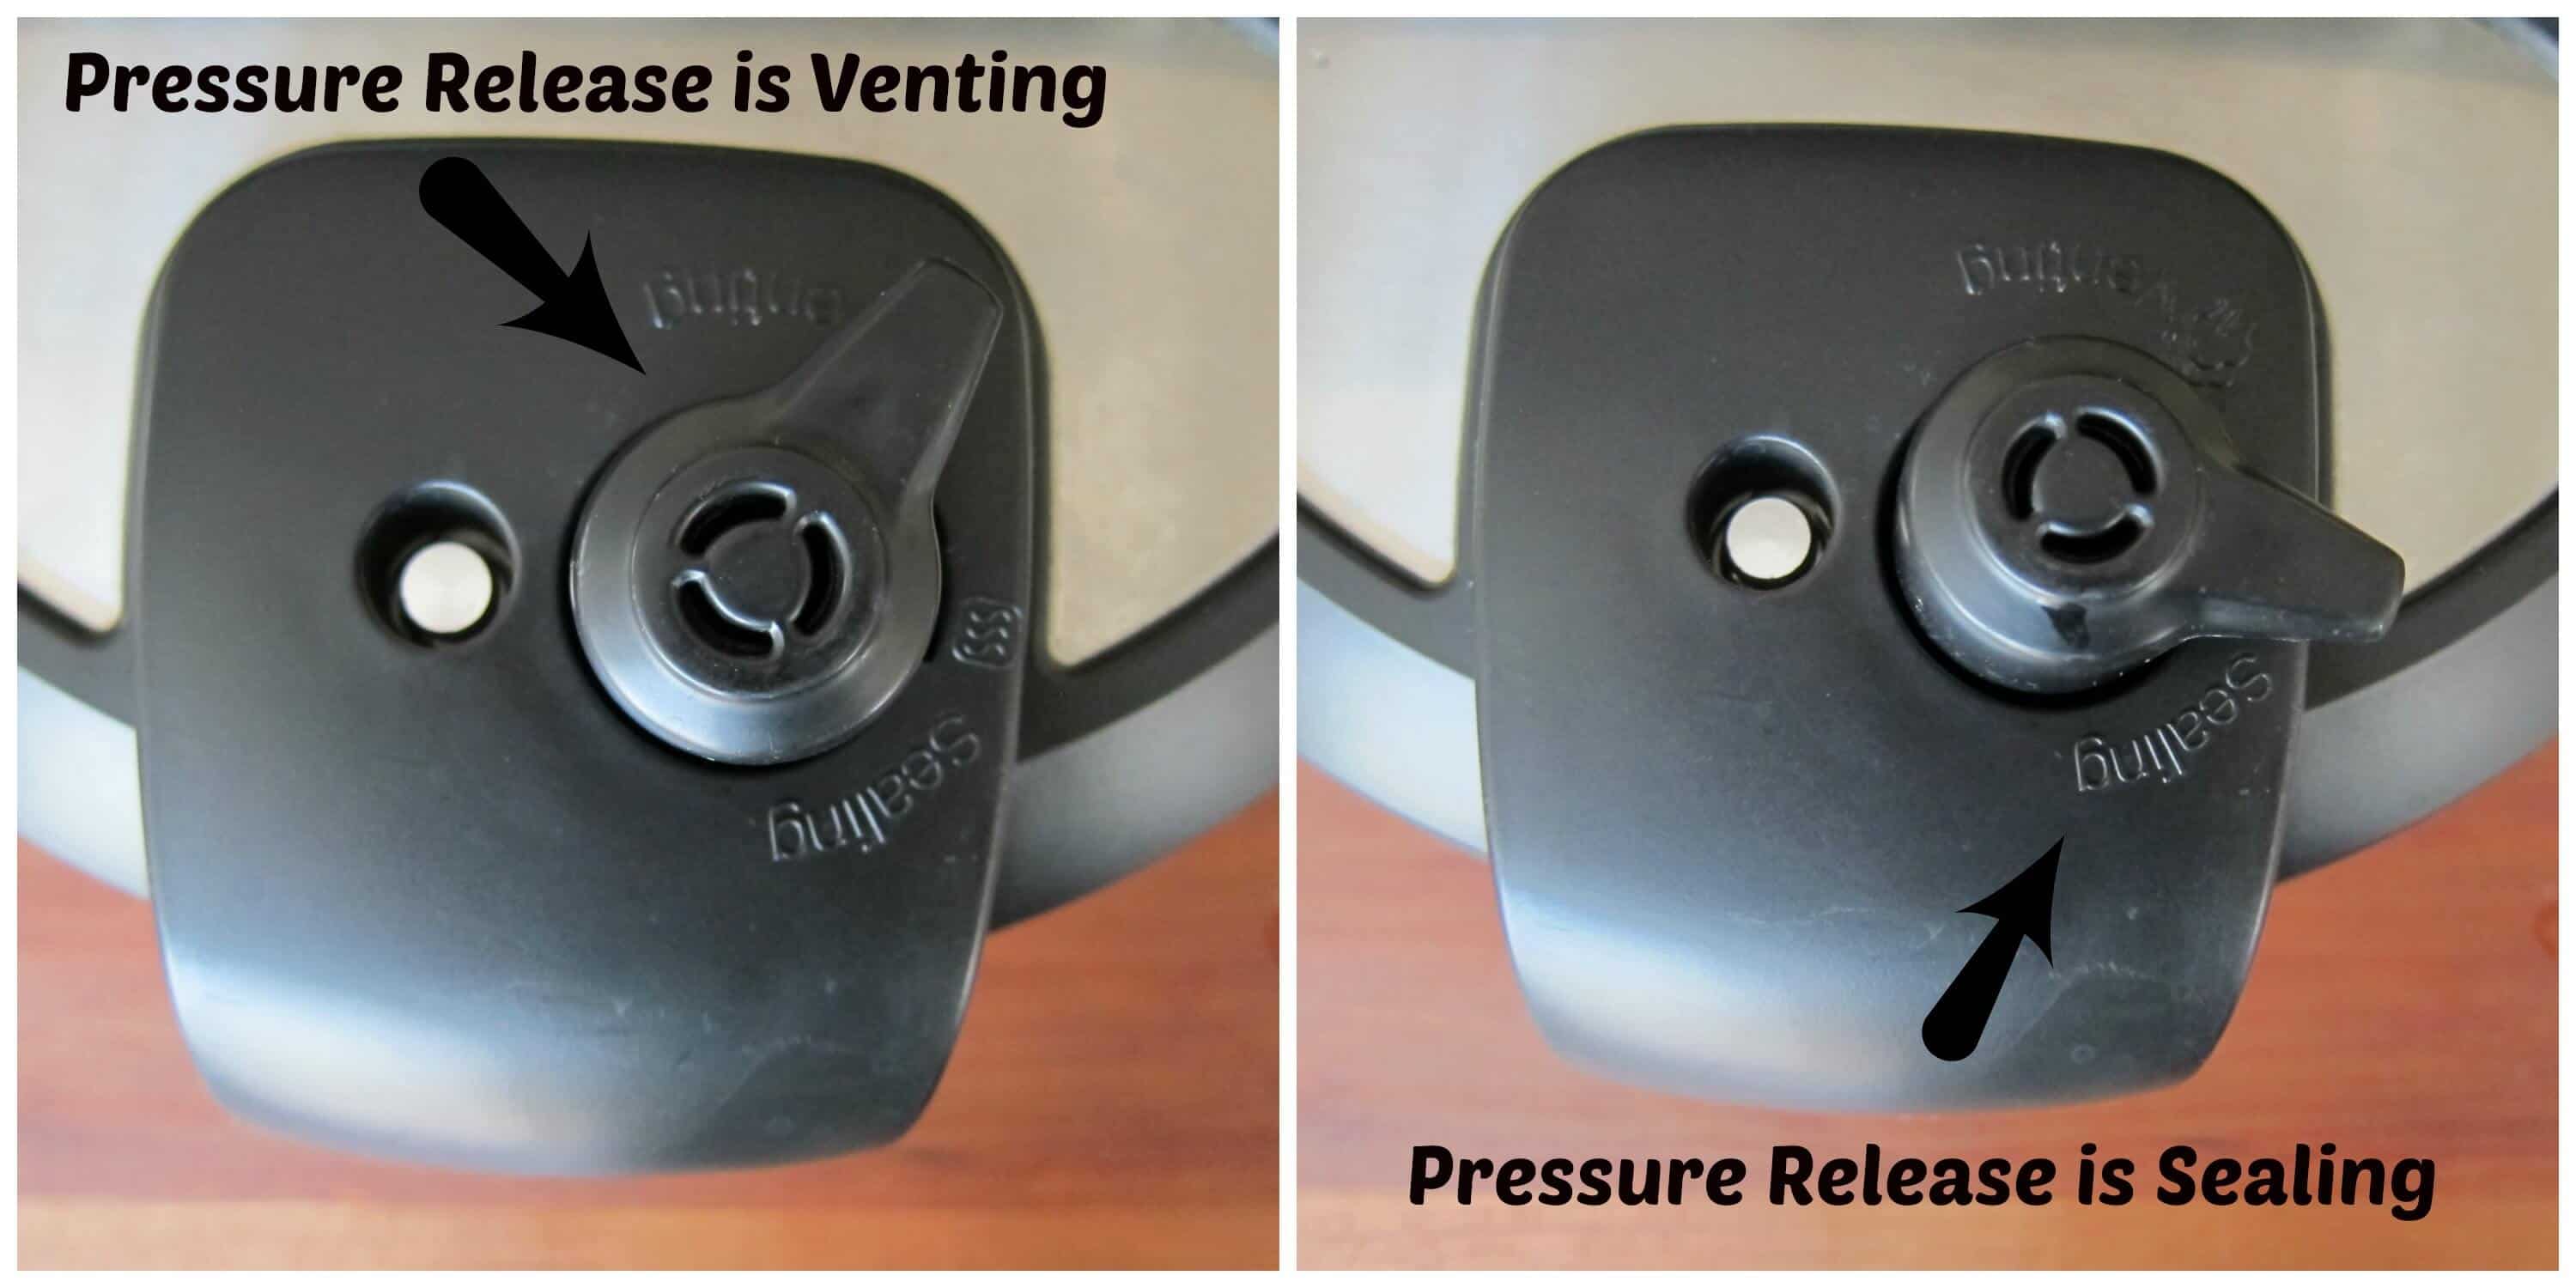 Pressure Release Handel in Venting and Sealing positions